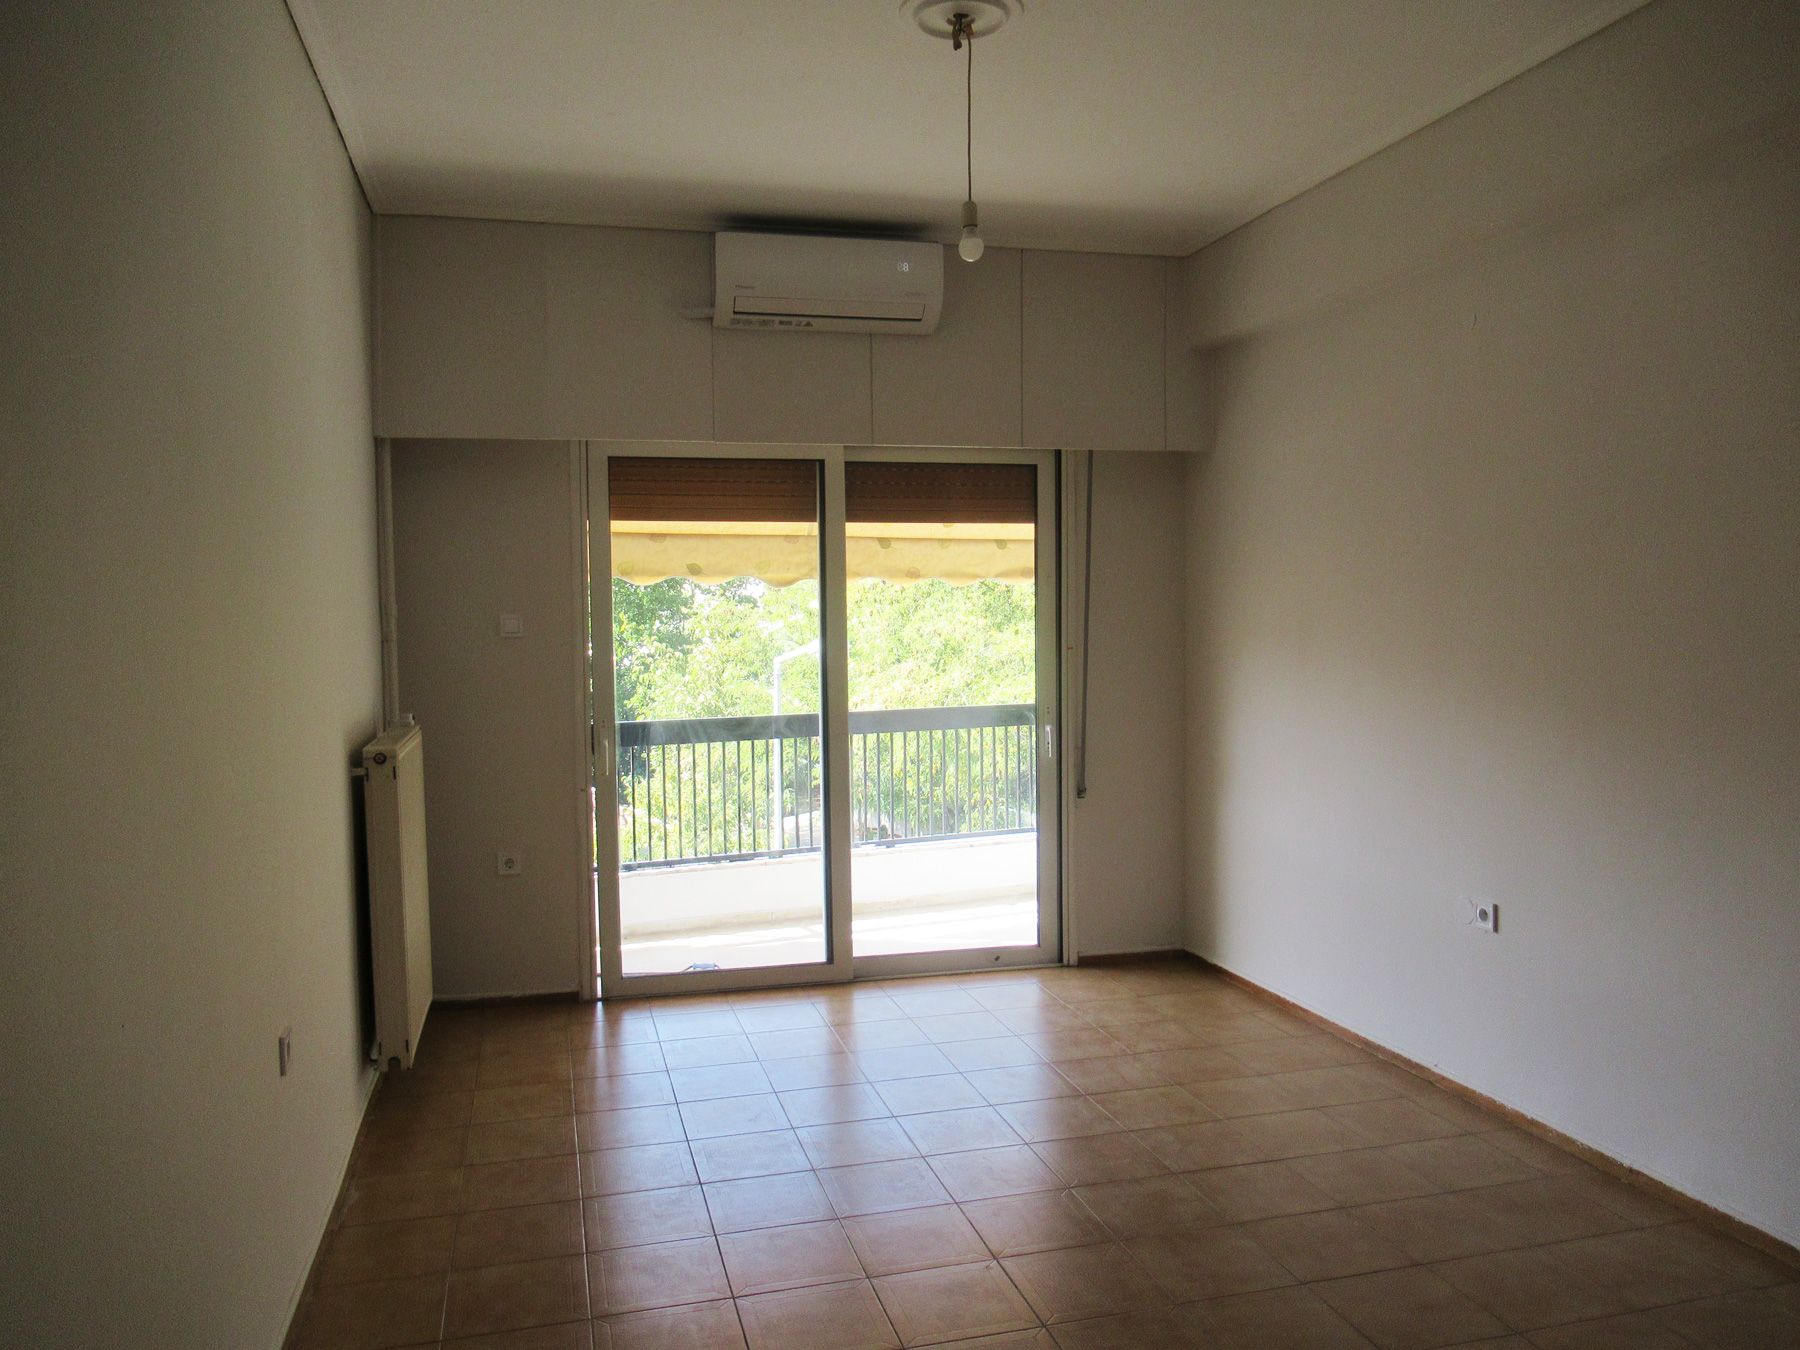 Bright two bedroom apartment for rent, 76 sq.m. on the 3rd floor in the center of Ioannina